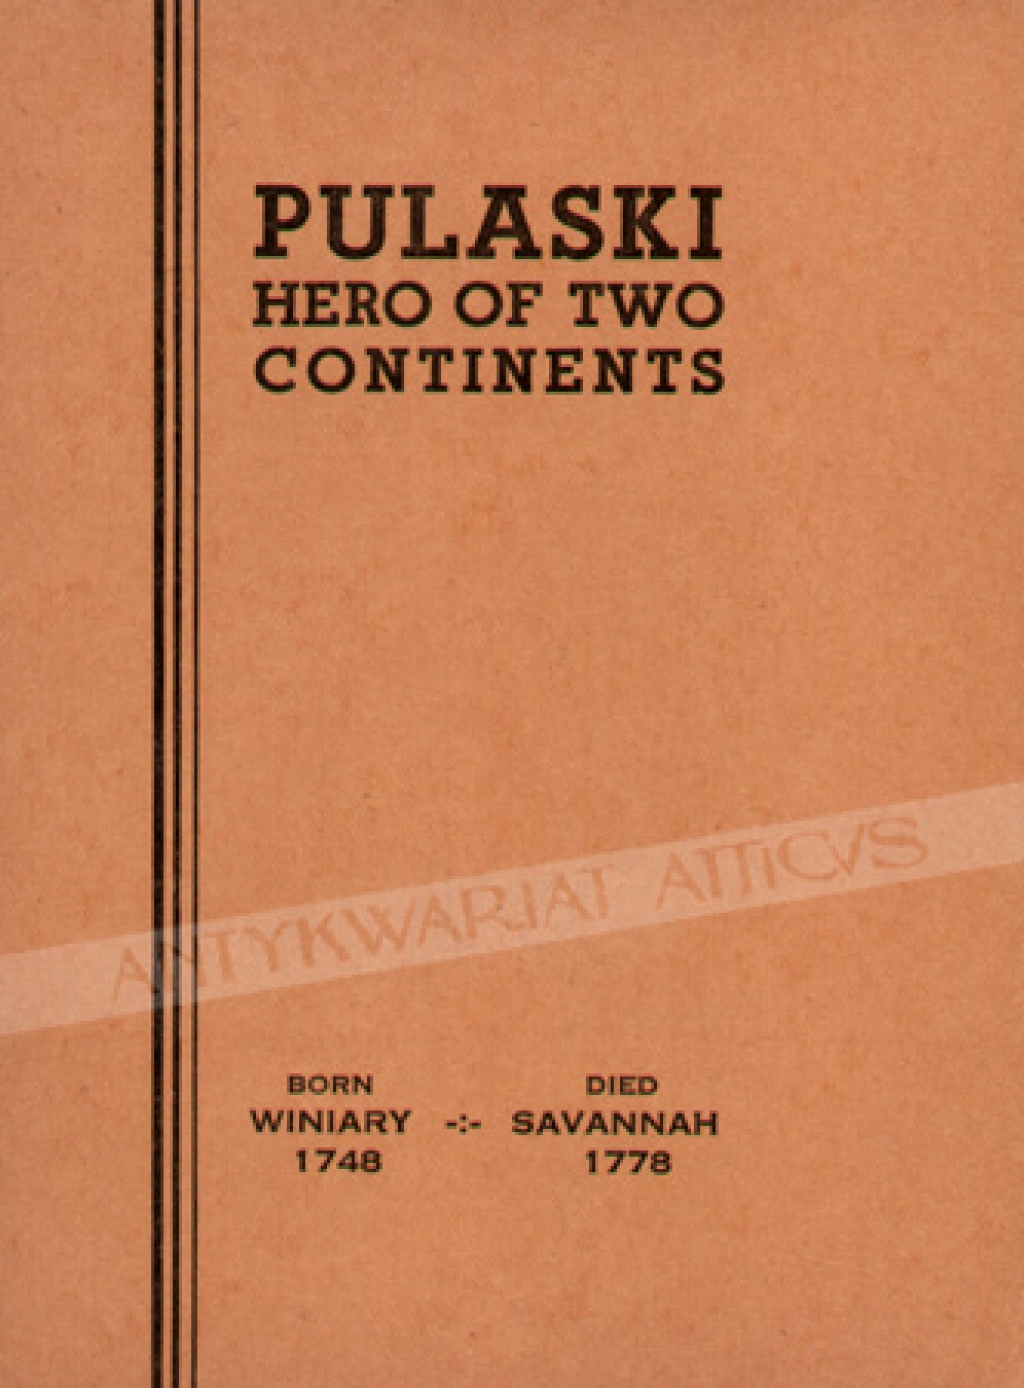 Pulaski, Hero of Two Continents